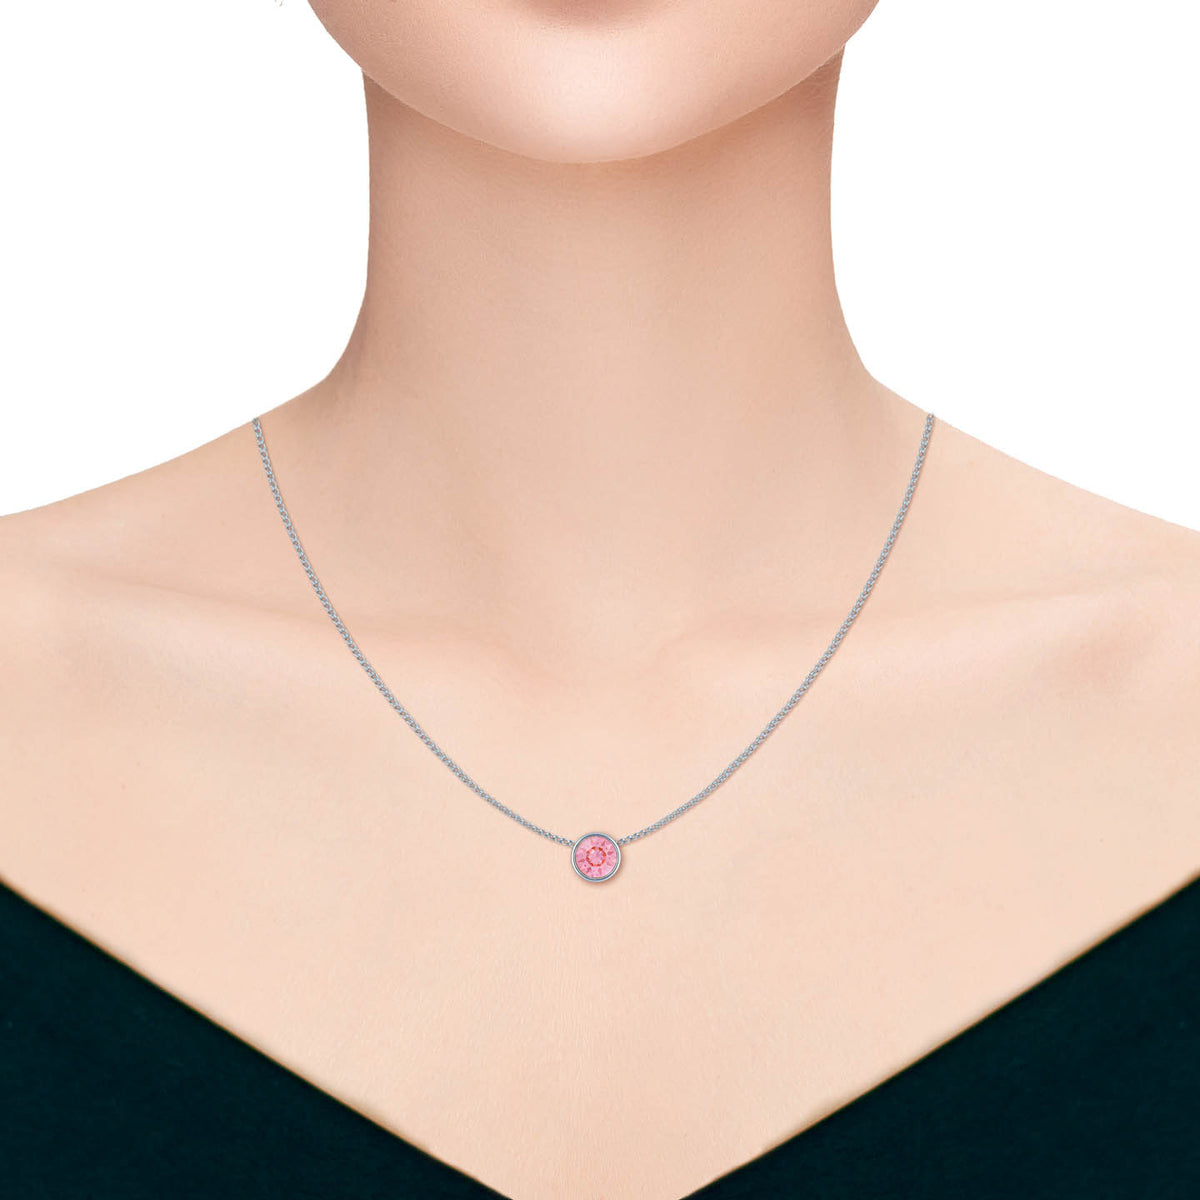 Harley Small Pendant Necklace with Pink Light Rose Round Crystals from Swarovski Silver Toned Rhodium Plated - Ed Heart